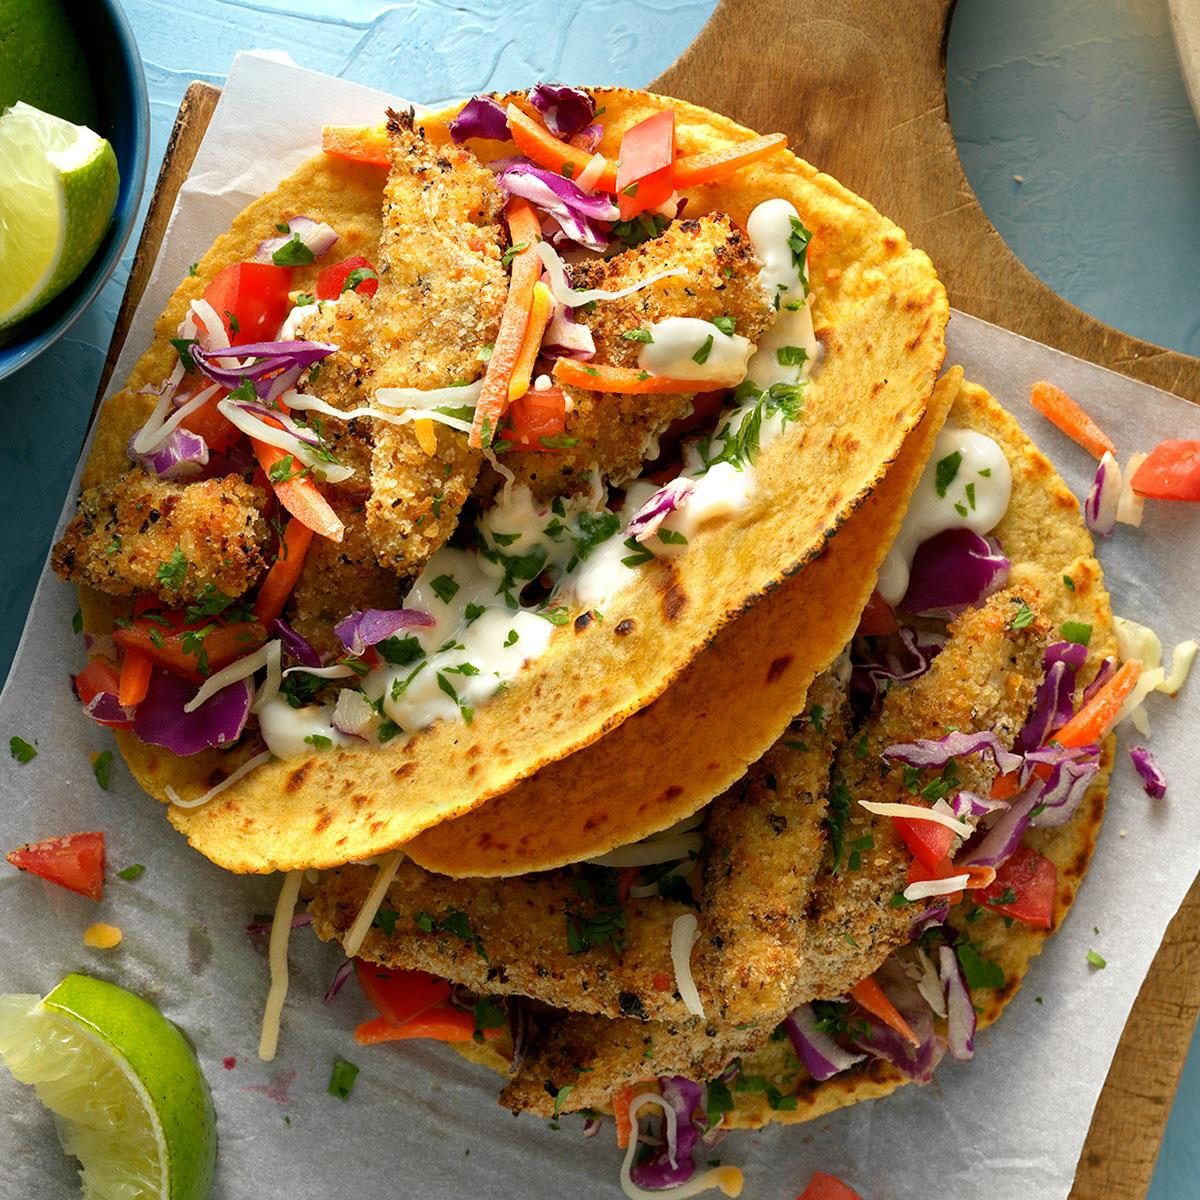 Inspired by: Crispy Fish Tacos